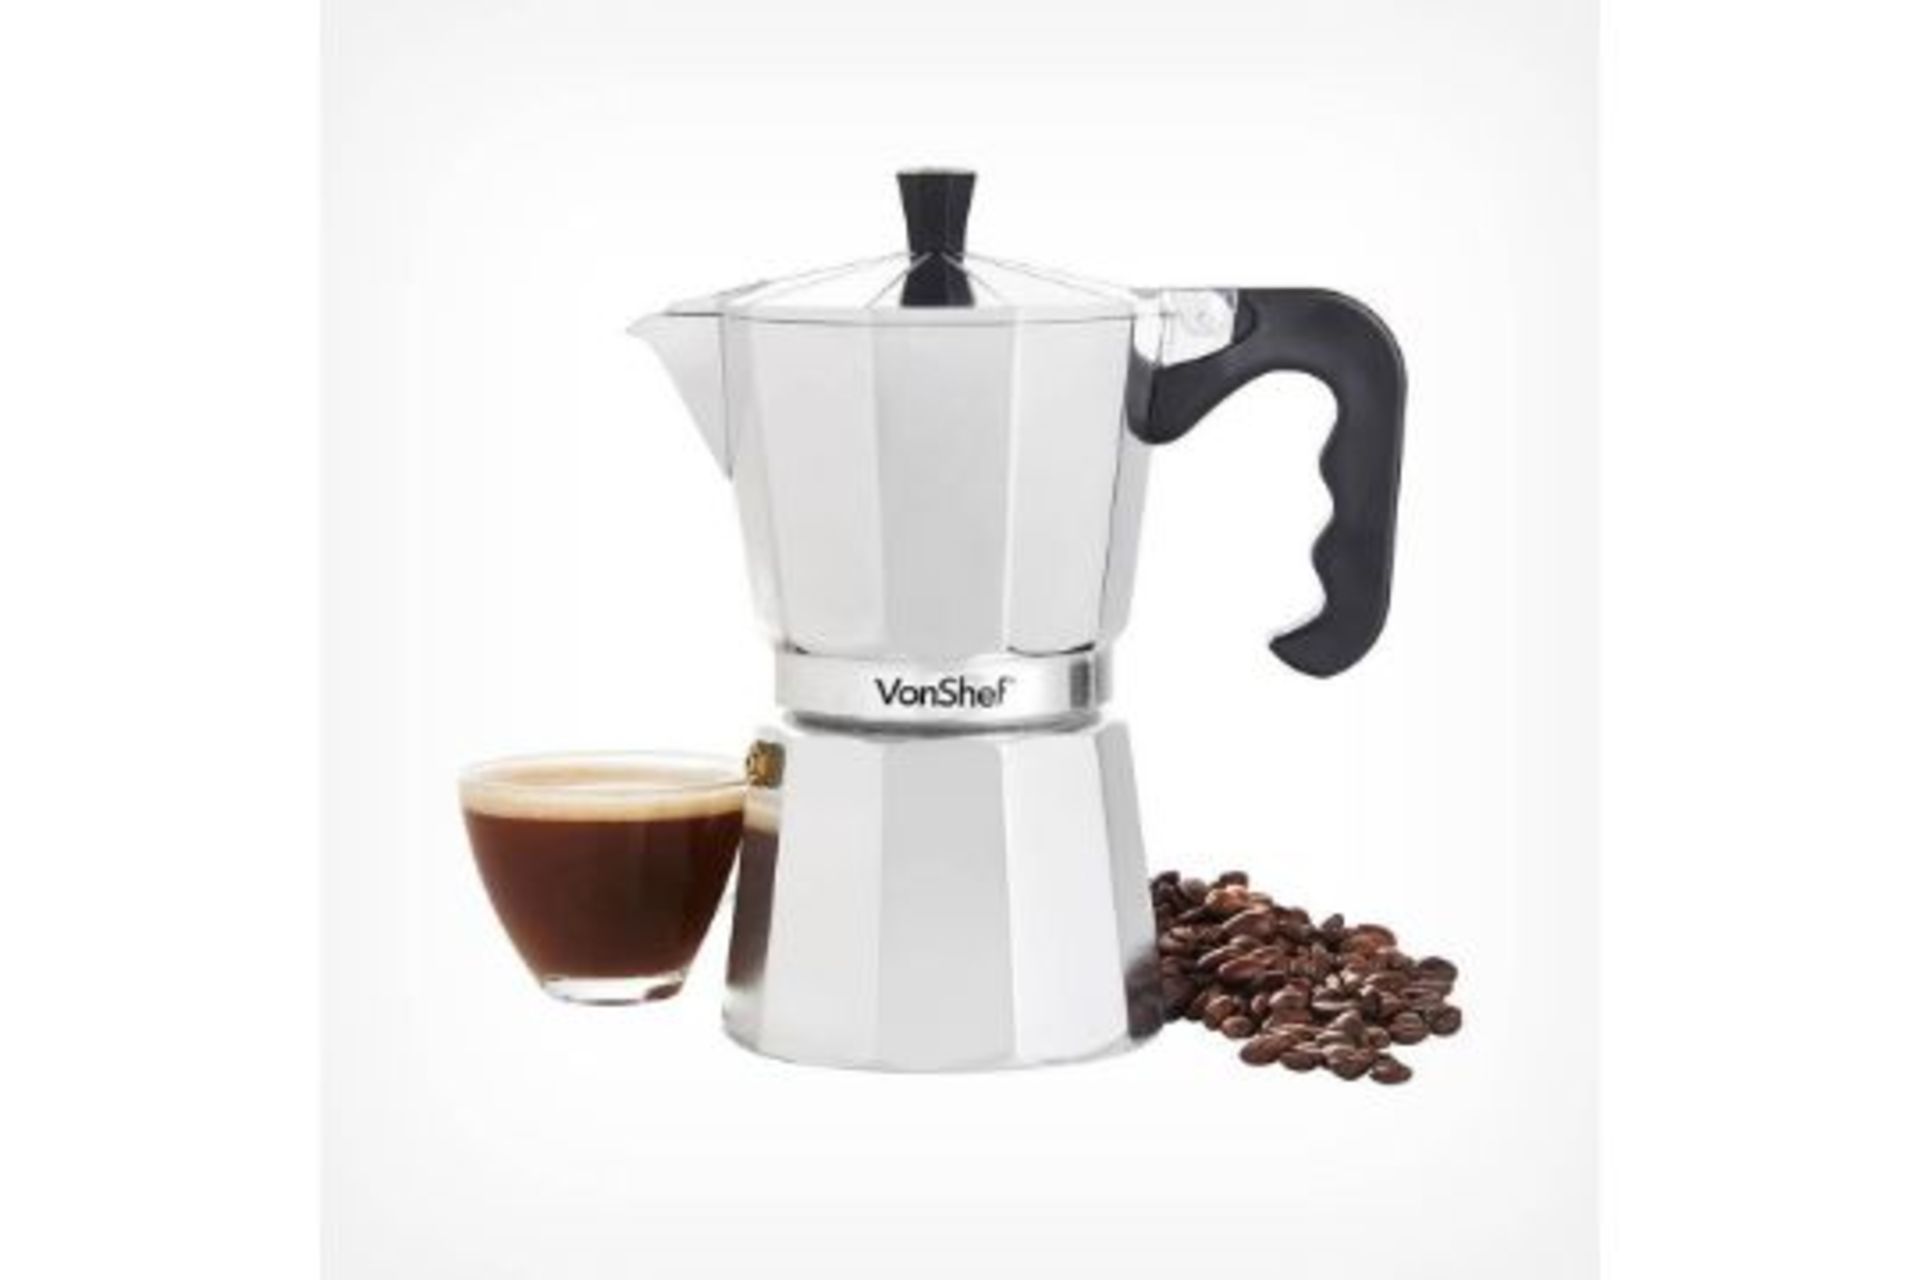 ER52 - Enjoy espresso every day with our super-stylish Vonshef Espresso Macchinetta. Suitable for